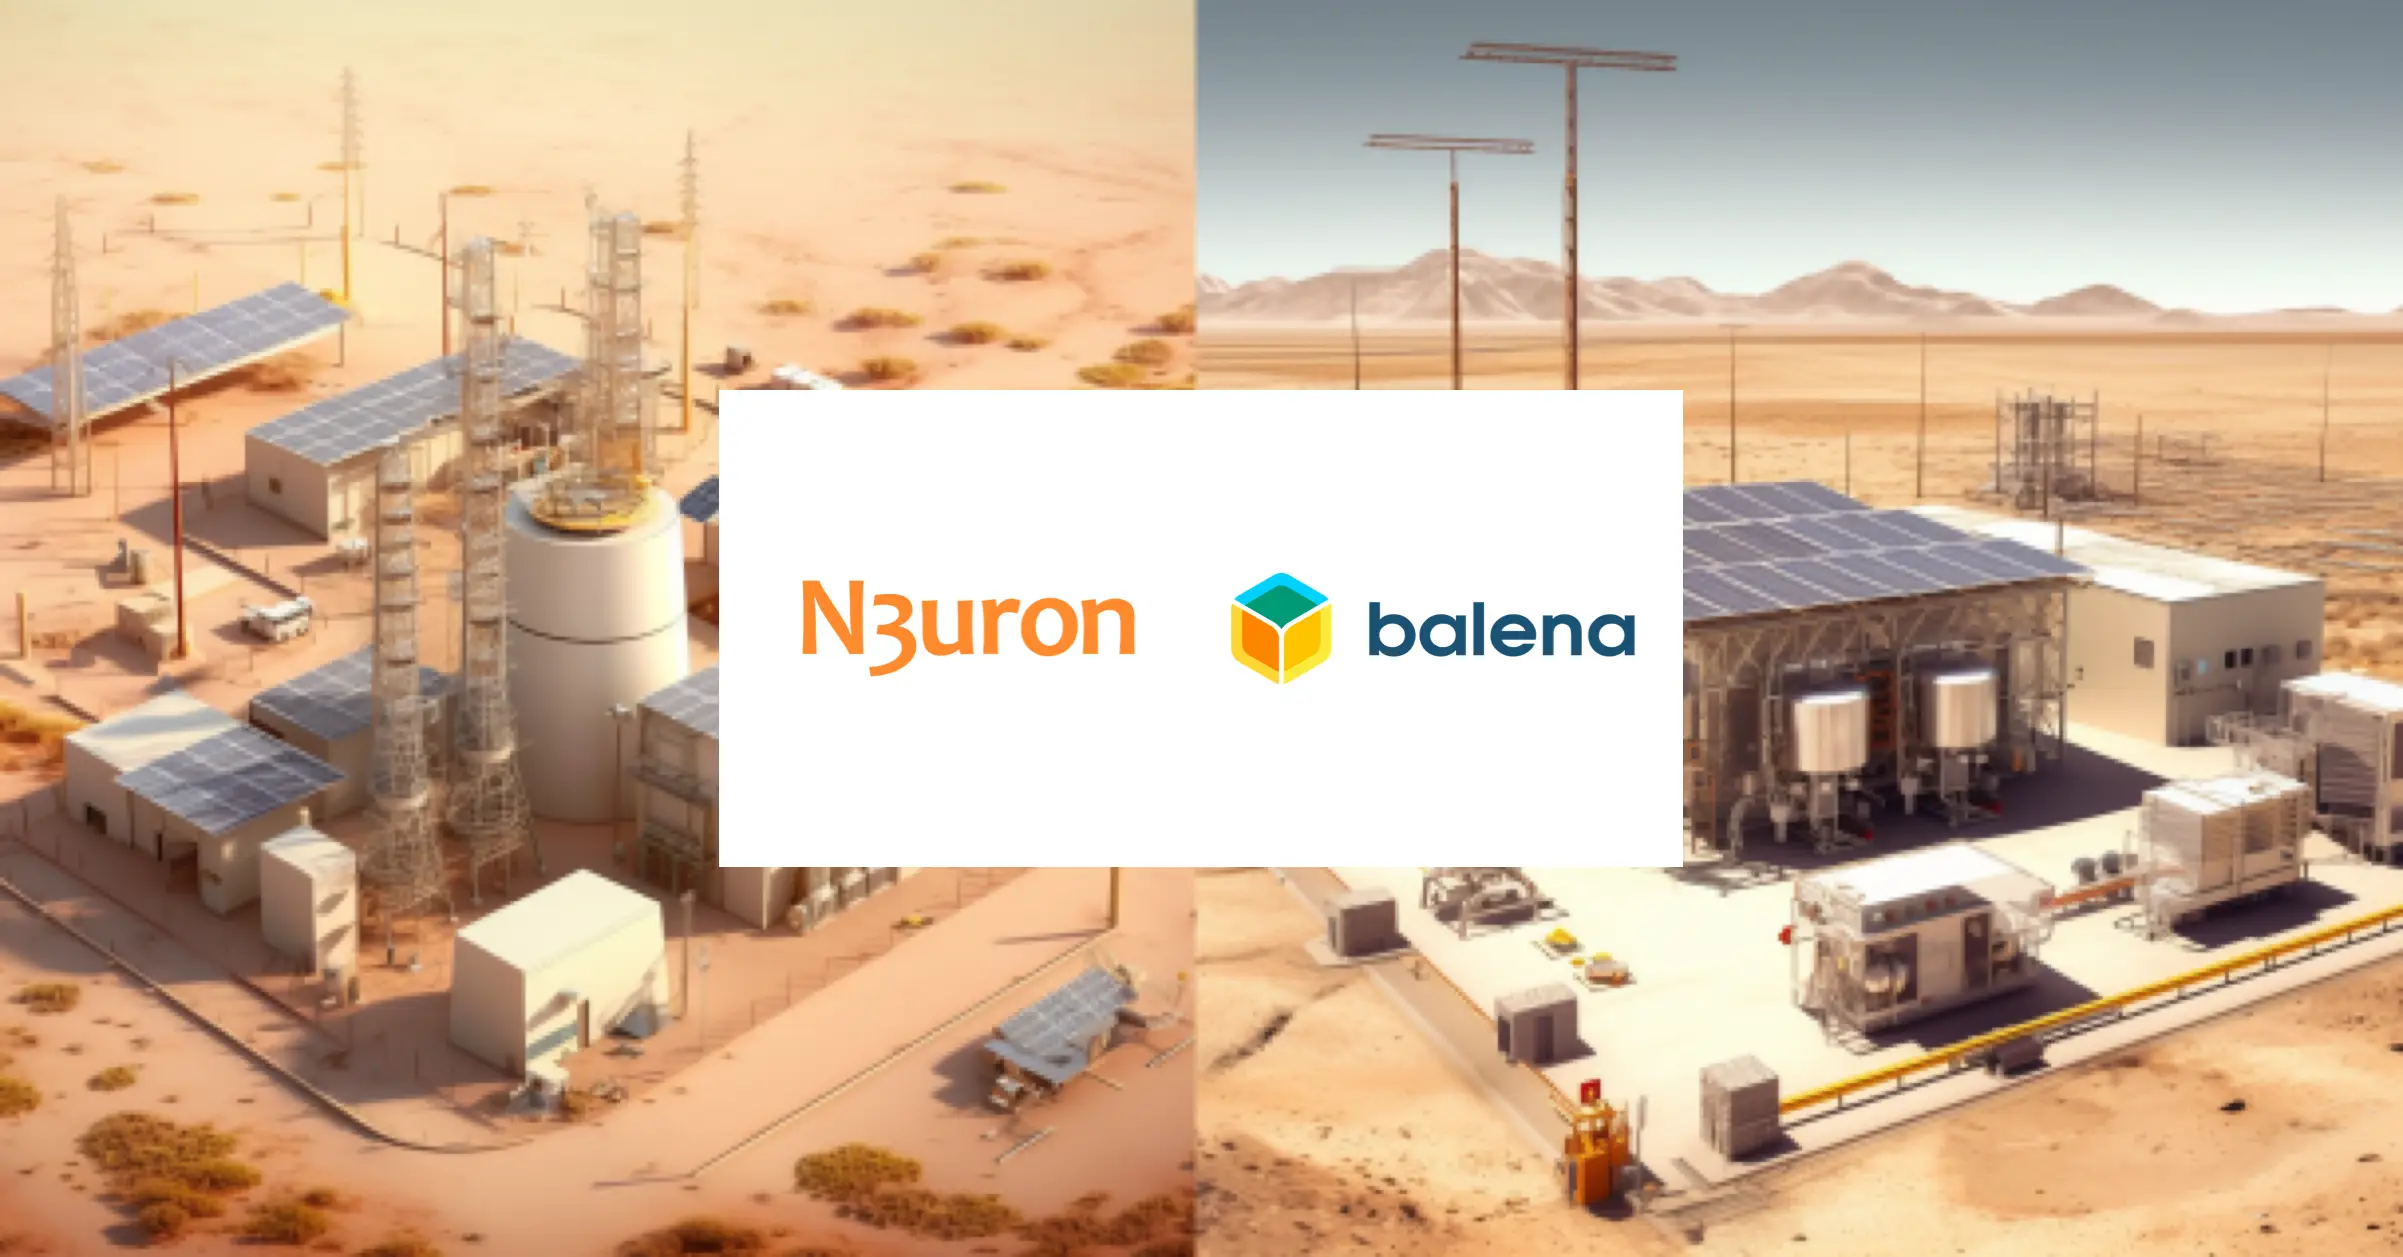 Remotely manage a Photovoltaic plant with an IIoT edge gateway running N3uron on balena